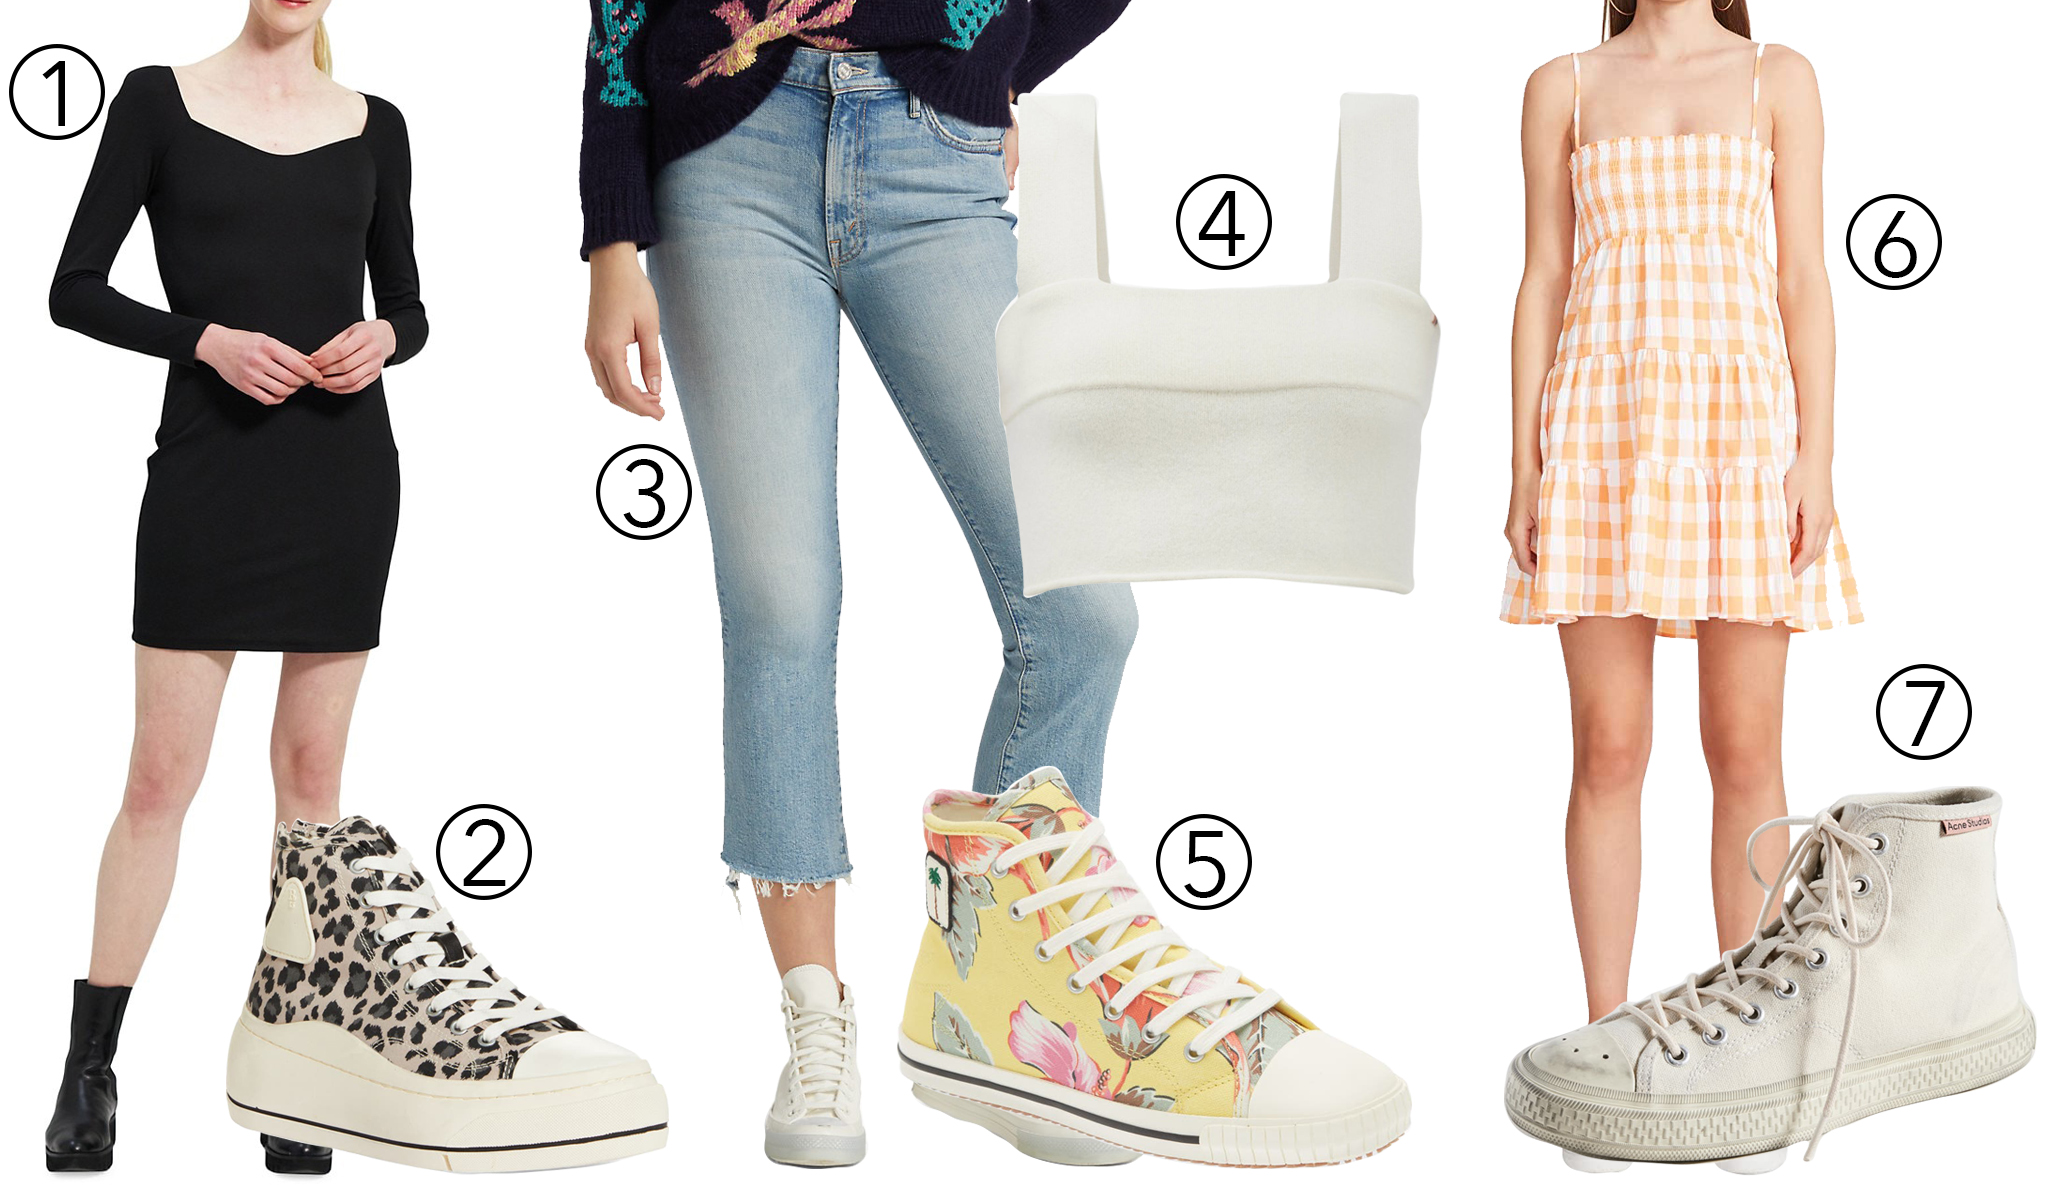 1. Theory Long-Sleeve Minidress; 2. R13 Distressed Platform High Top Sneaker; 3. Mother The Insider Cropped Jeans; 4. Extreme Cashmere No.219 Caress Cropped Top; 5. Palm Angels Hibiscus High Top Sneaker; 6. BB Dakota by Steve Madden Flirt A Lot Mini Dress; 7. Acne Studios Ballow High Tumbled Sneaker